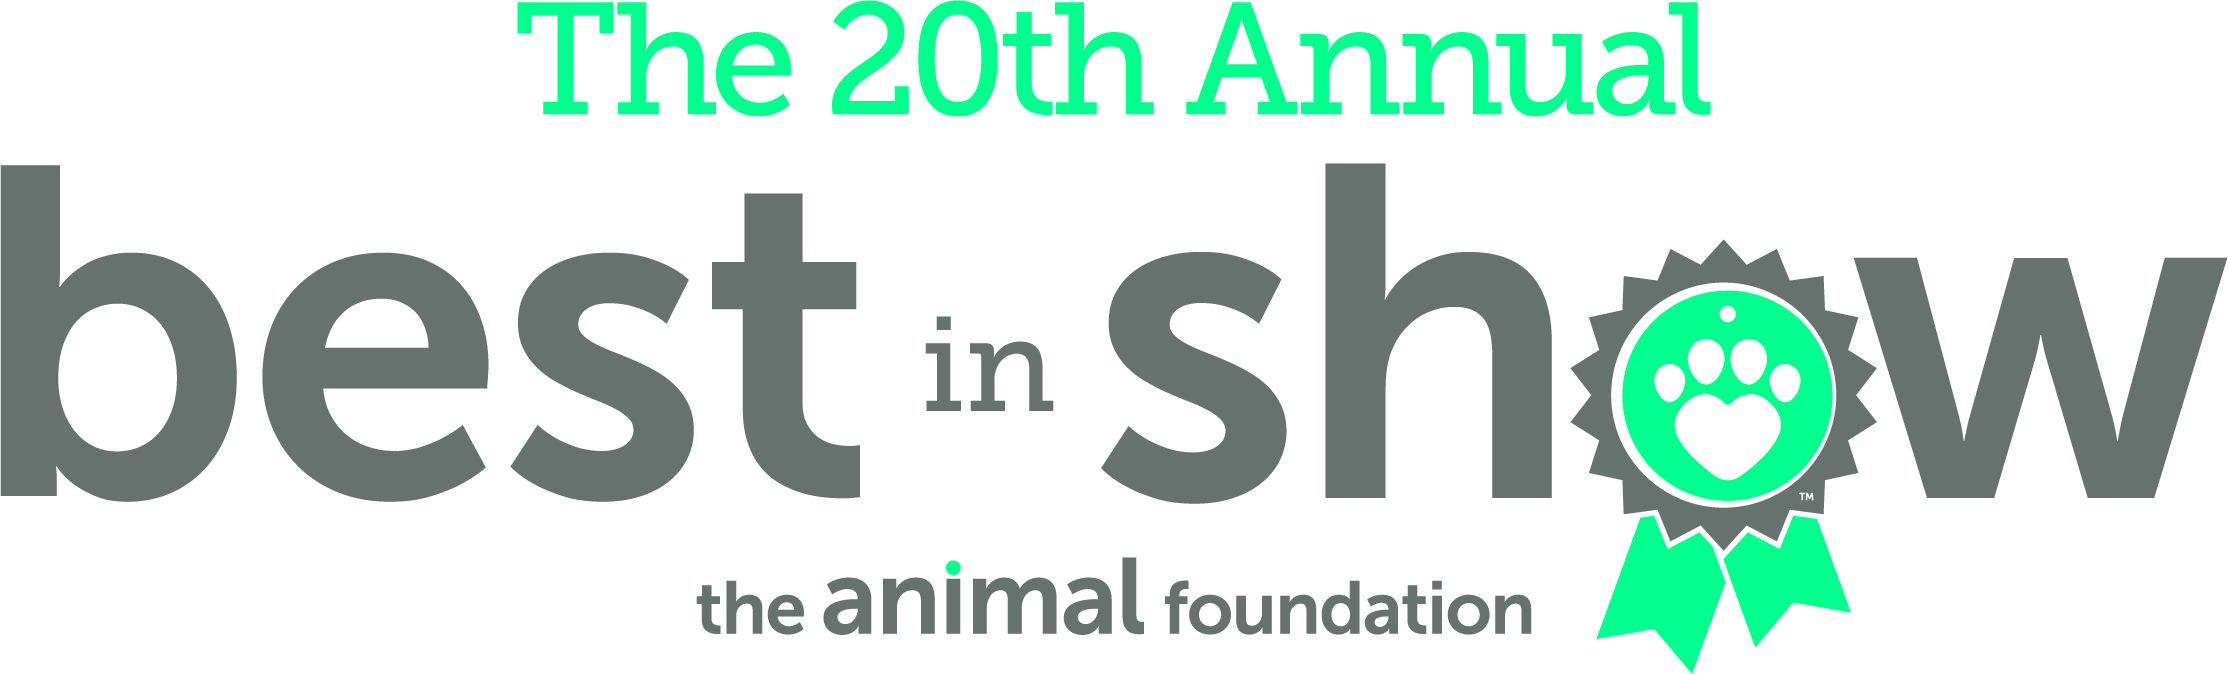 The 20th Annual Best in Show